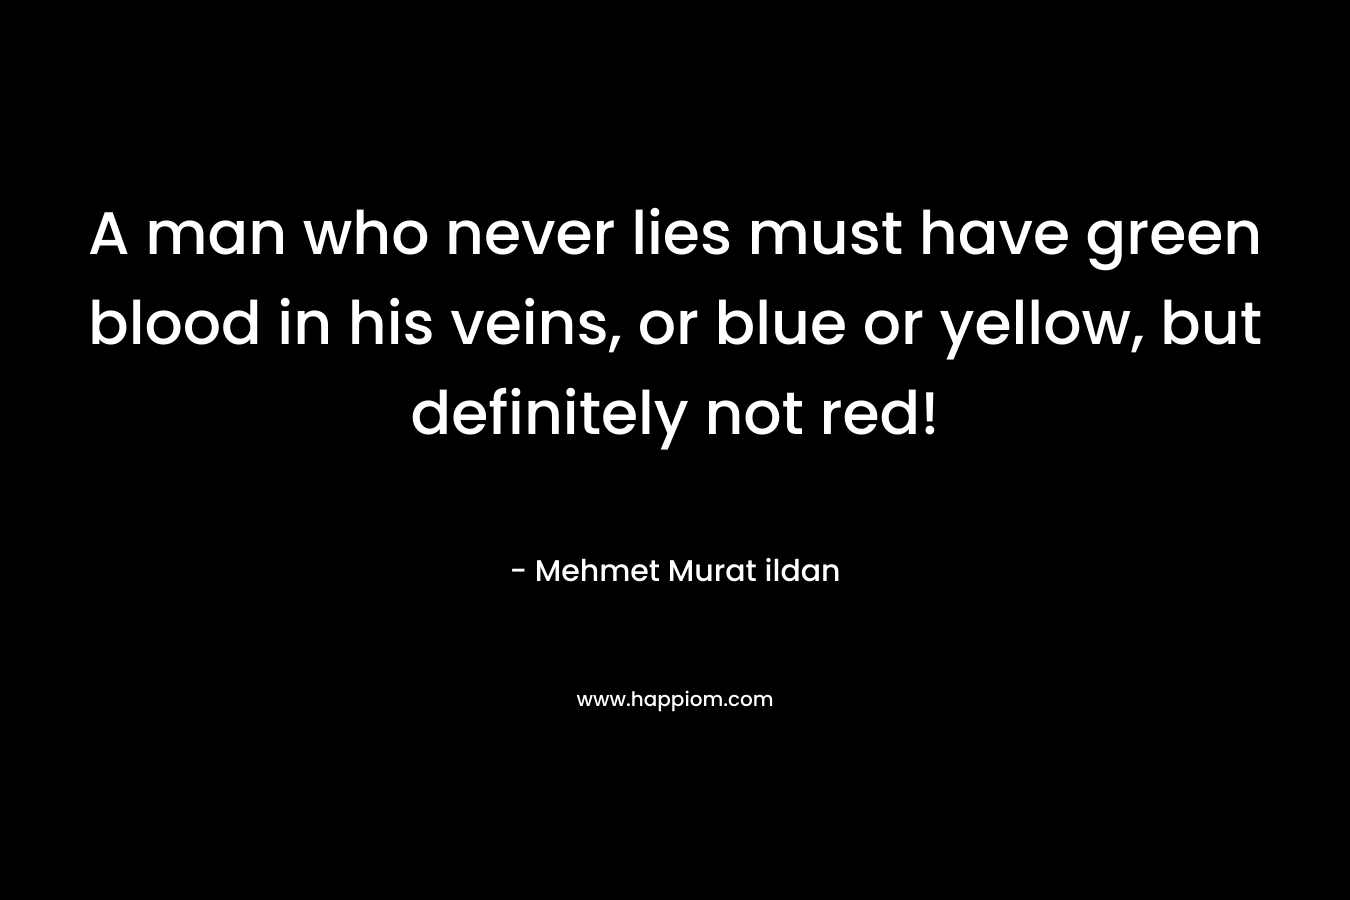 A man who never lies must have green blood in his veins, or blue or yellow, but definitely not red!